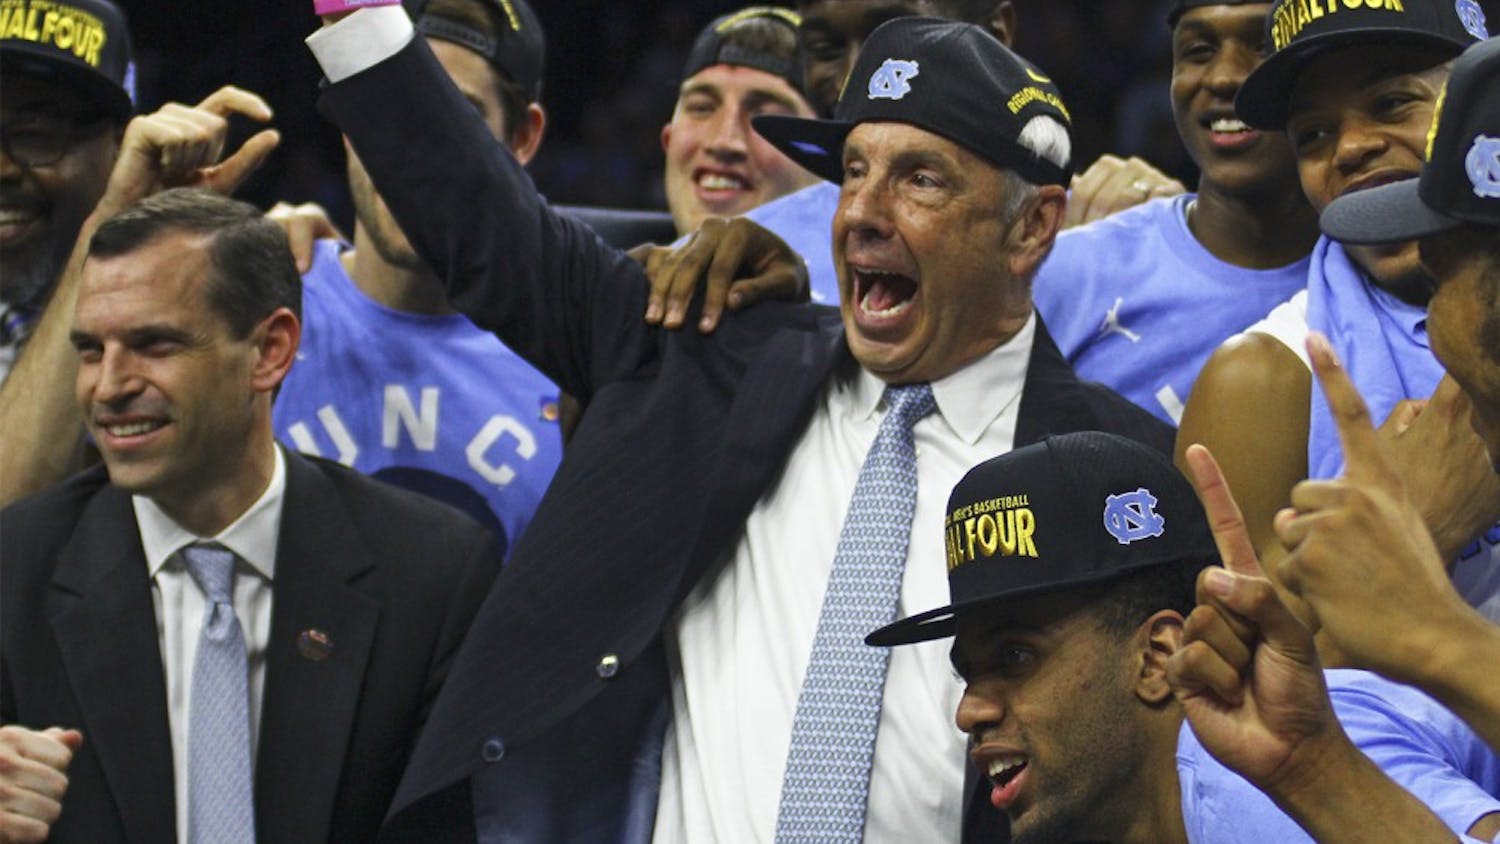 Roy Williams and the Tar Heels celebrate after their 88-74 win against Notre Dame Sunday, advancing them to the Final Four.